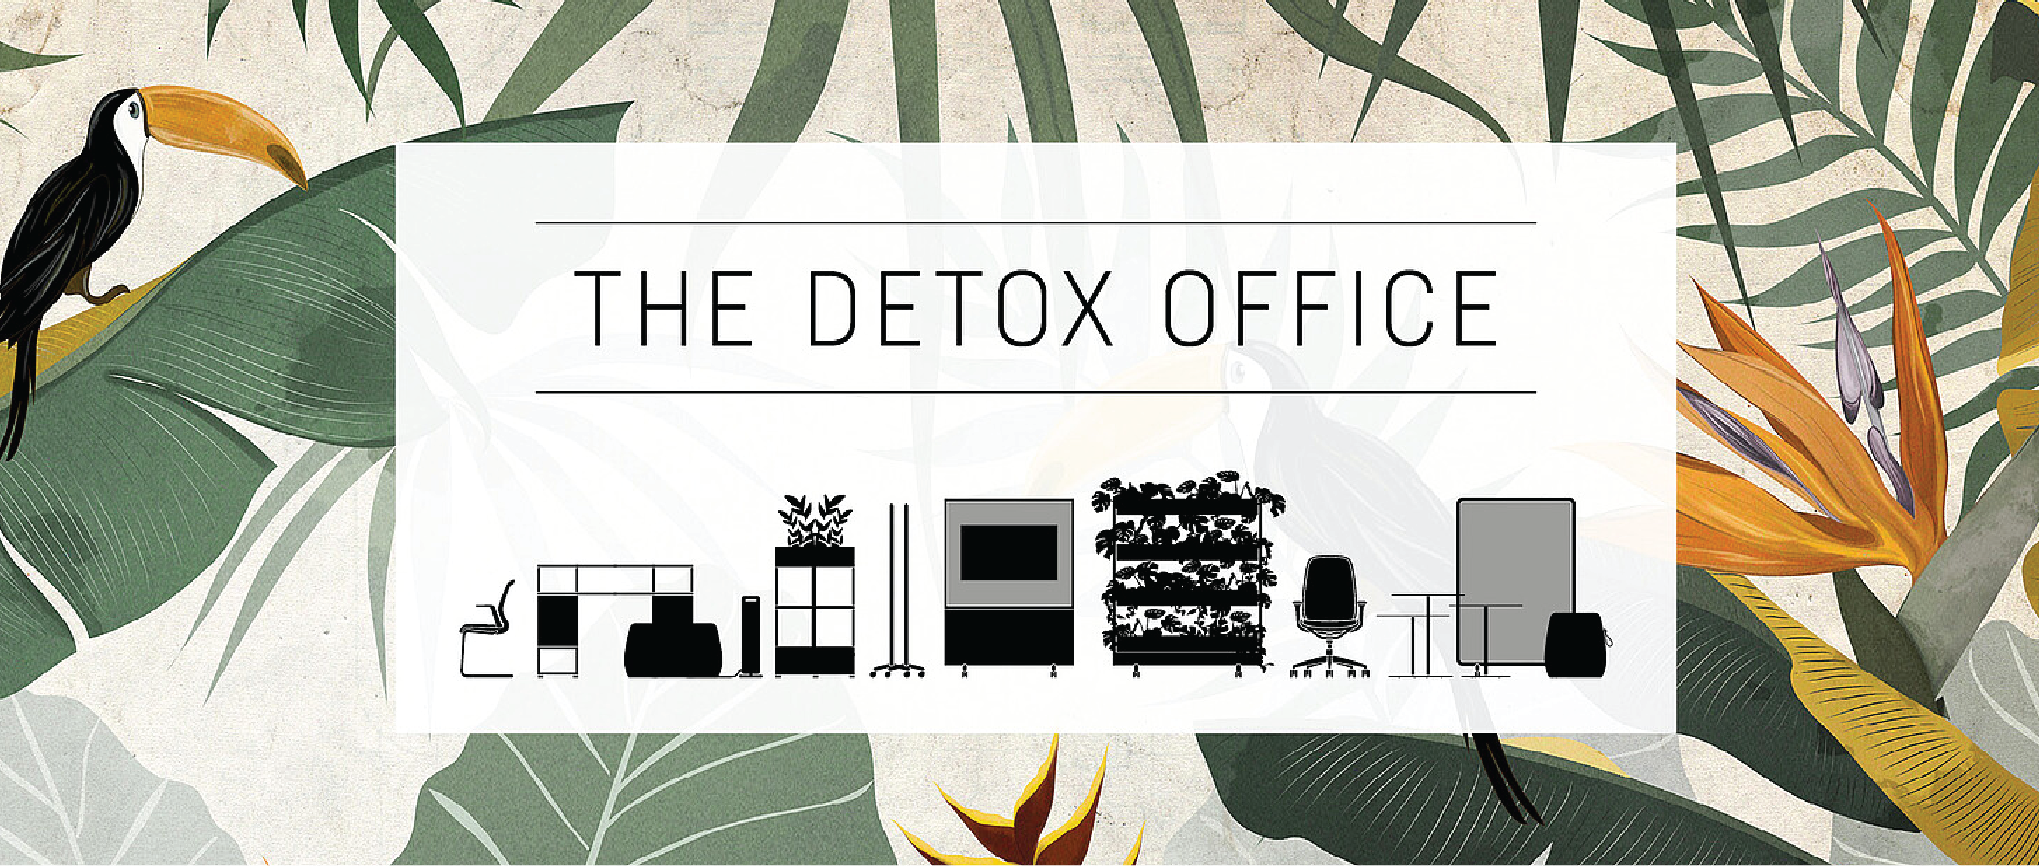 The Detox Office – a Caring Ecosystem for the Workplace